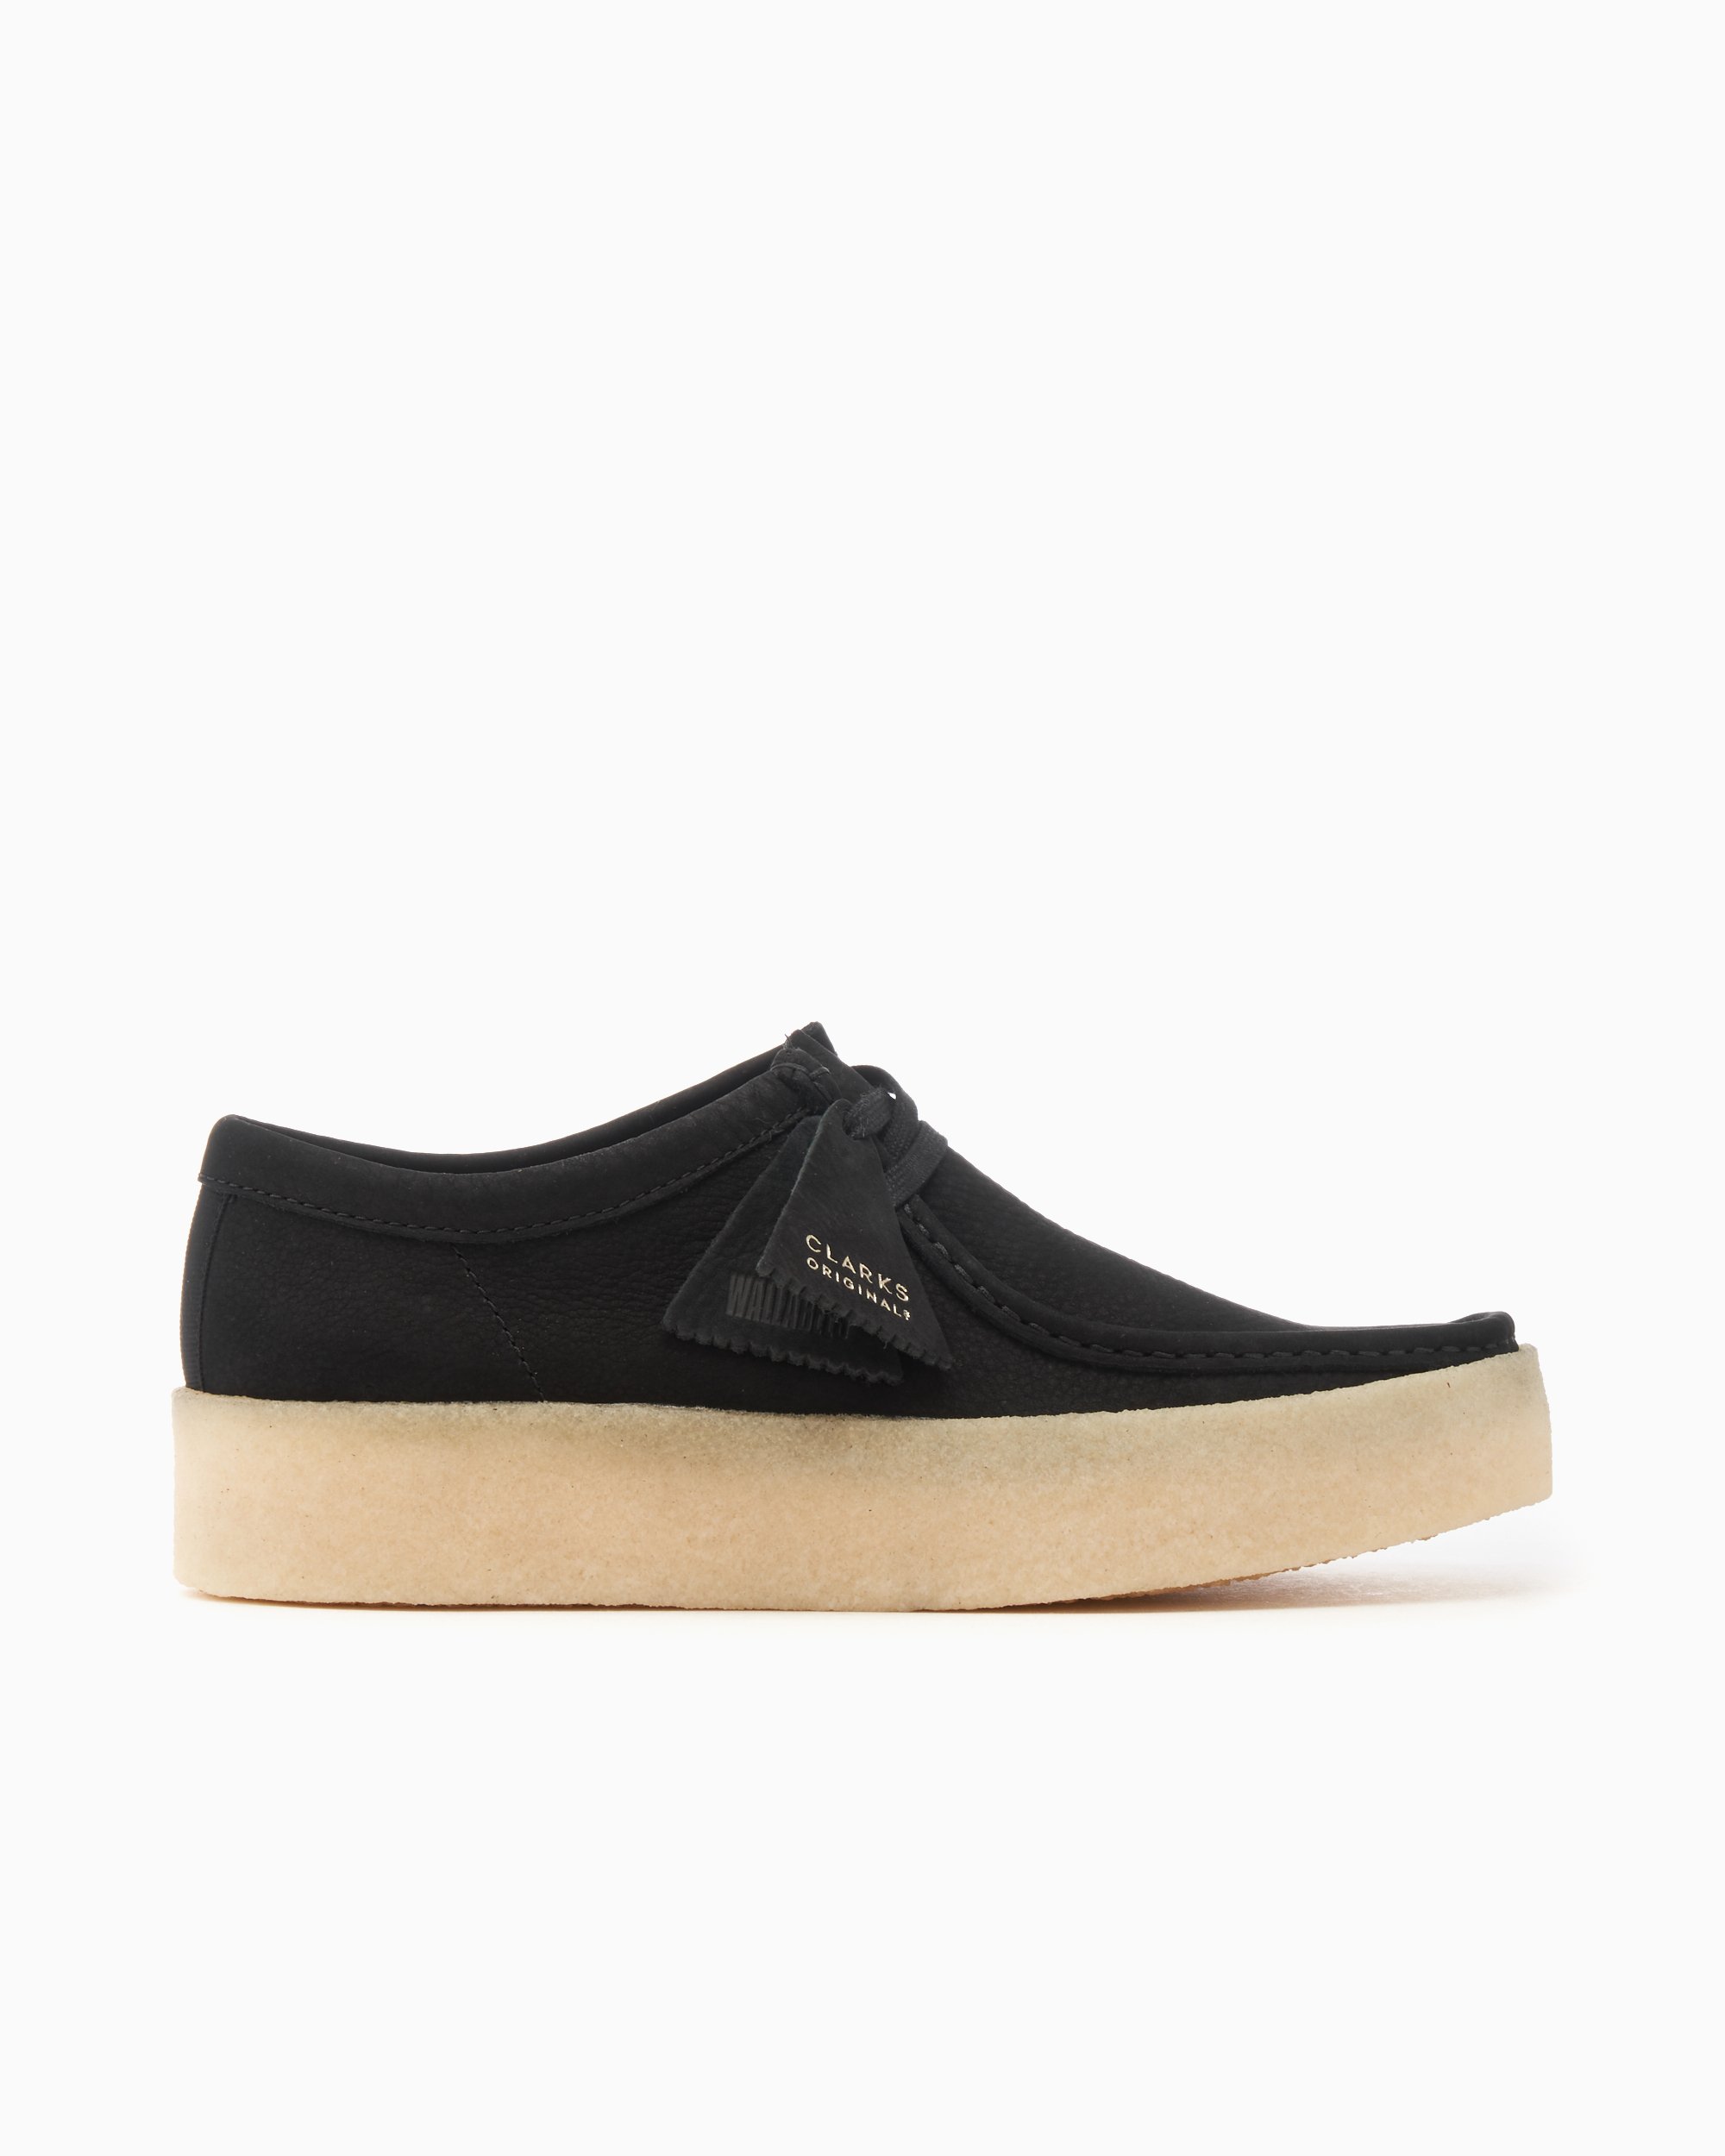 Clarks Wallabee Cup Black 261581447| Buy Online at FOOTDISTRICT